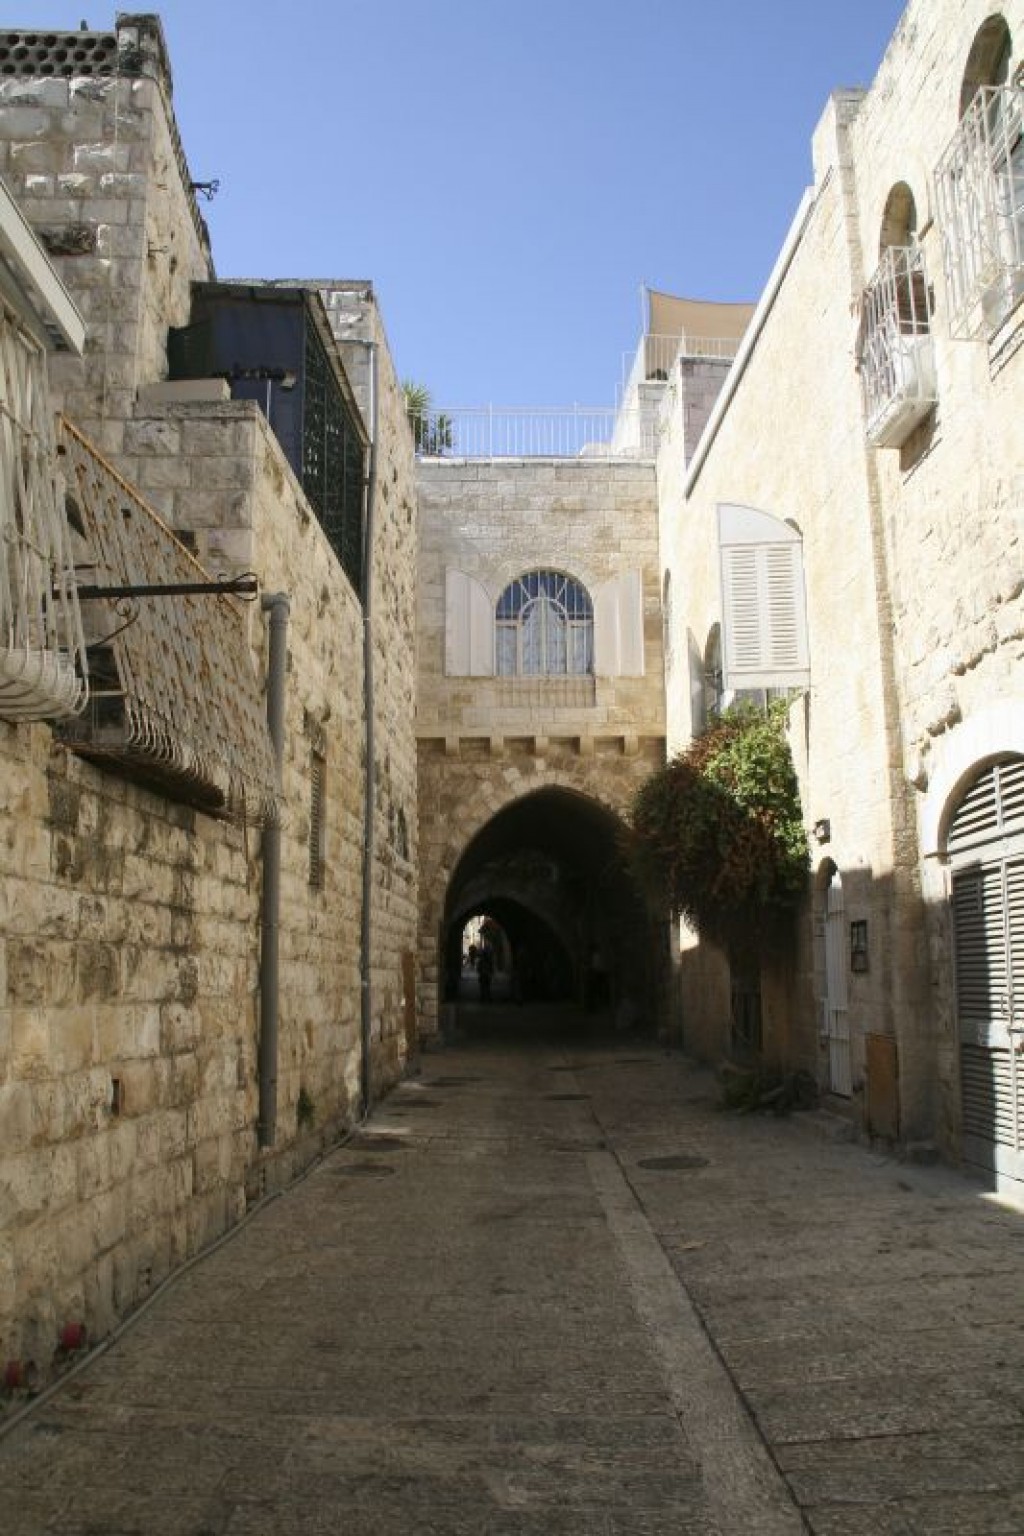 Some of the other sights, hotels, and restaurants in Old Jerusalem